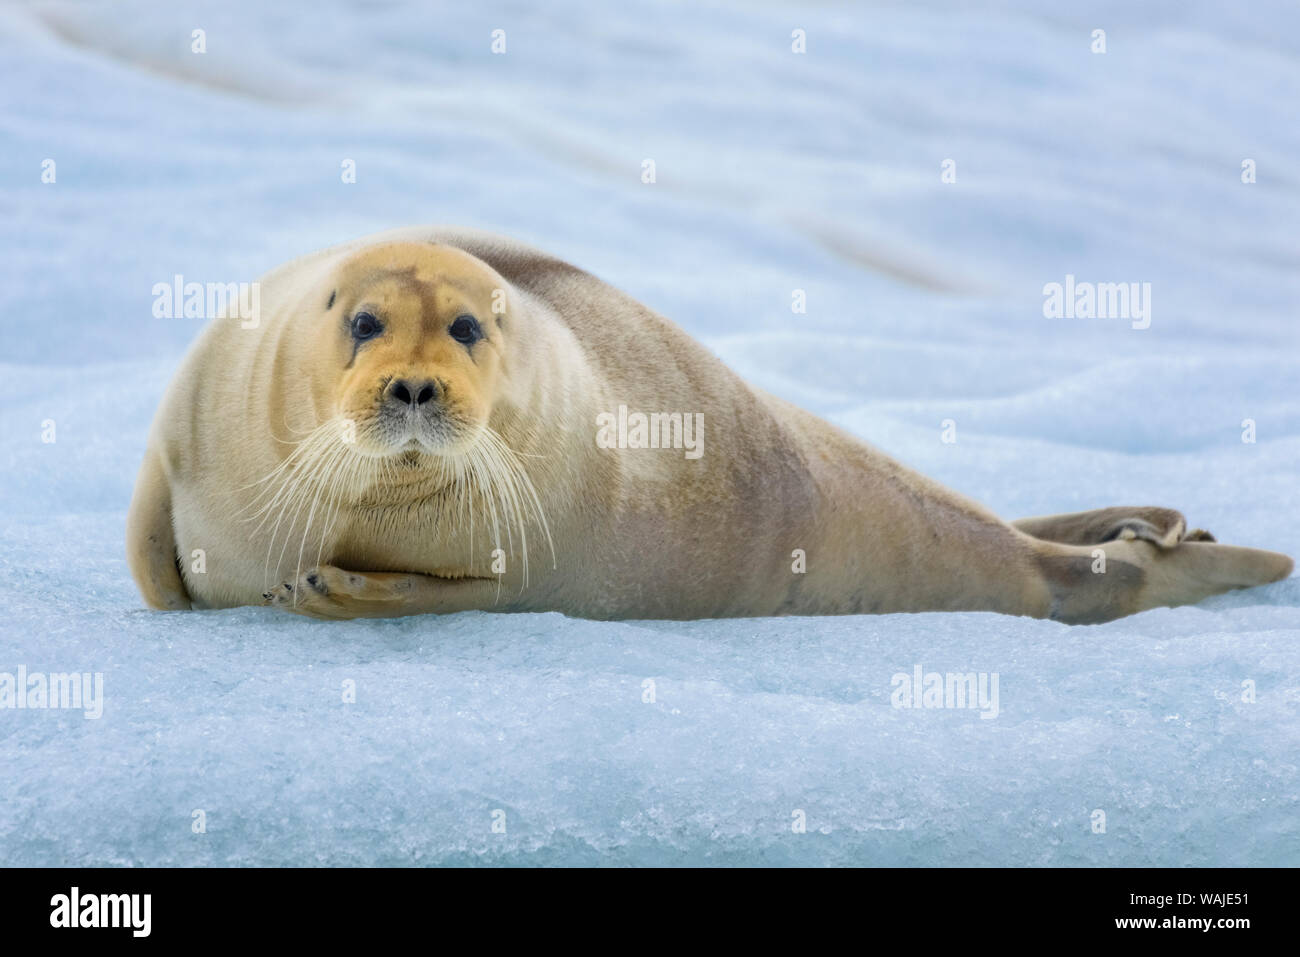 Norway, Svalbard, Spitsbergen. 14th July Glacier, young bearded seal hauled out on an iceberg. Stock Photo